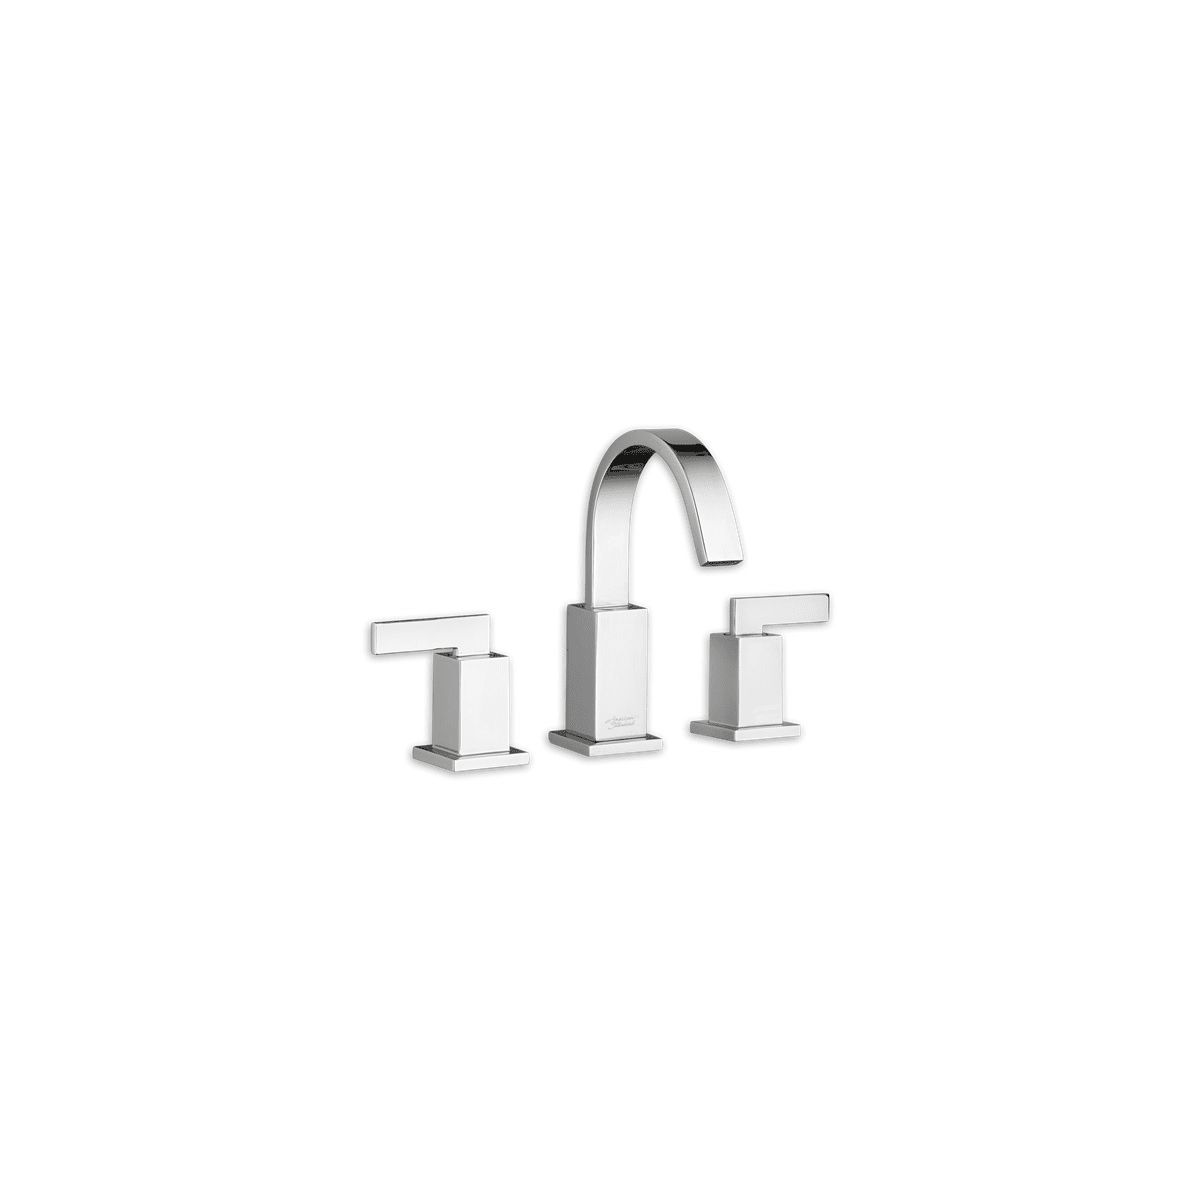 Times Square Widespread Bathroom Faucet with Speed Connect Pop-Up Drain and Metal Handles | Build.com, Inc.